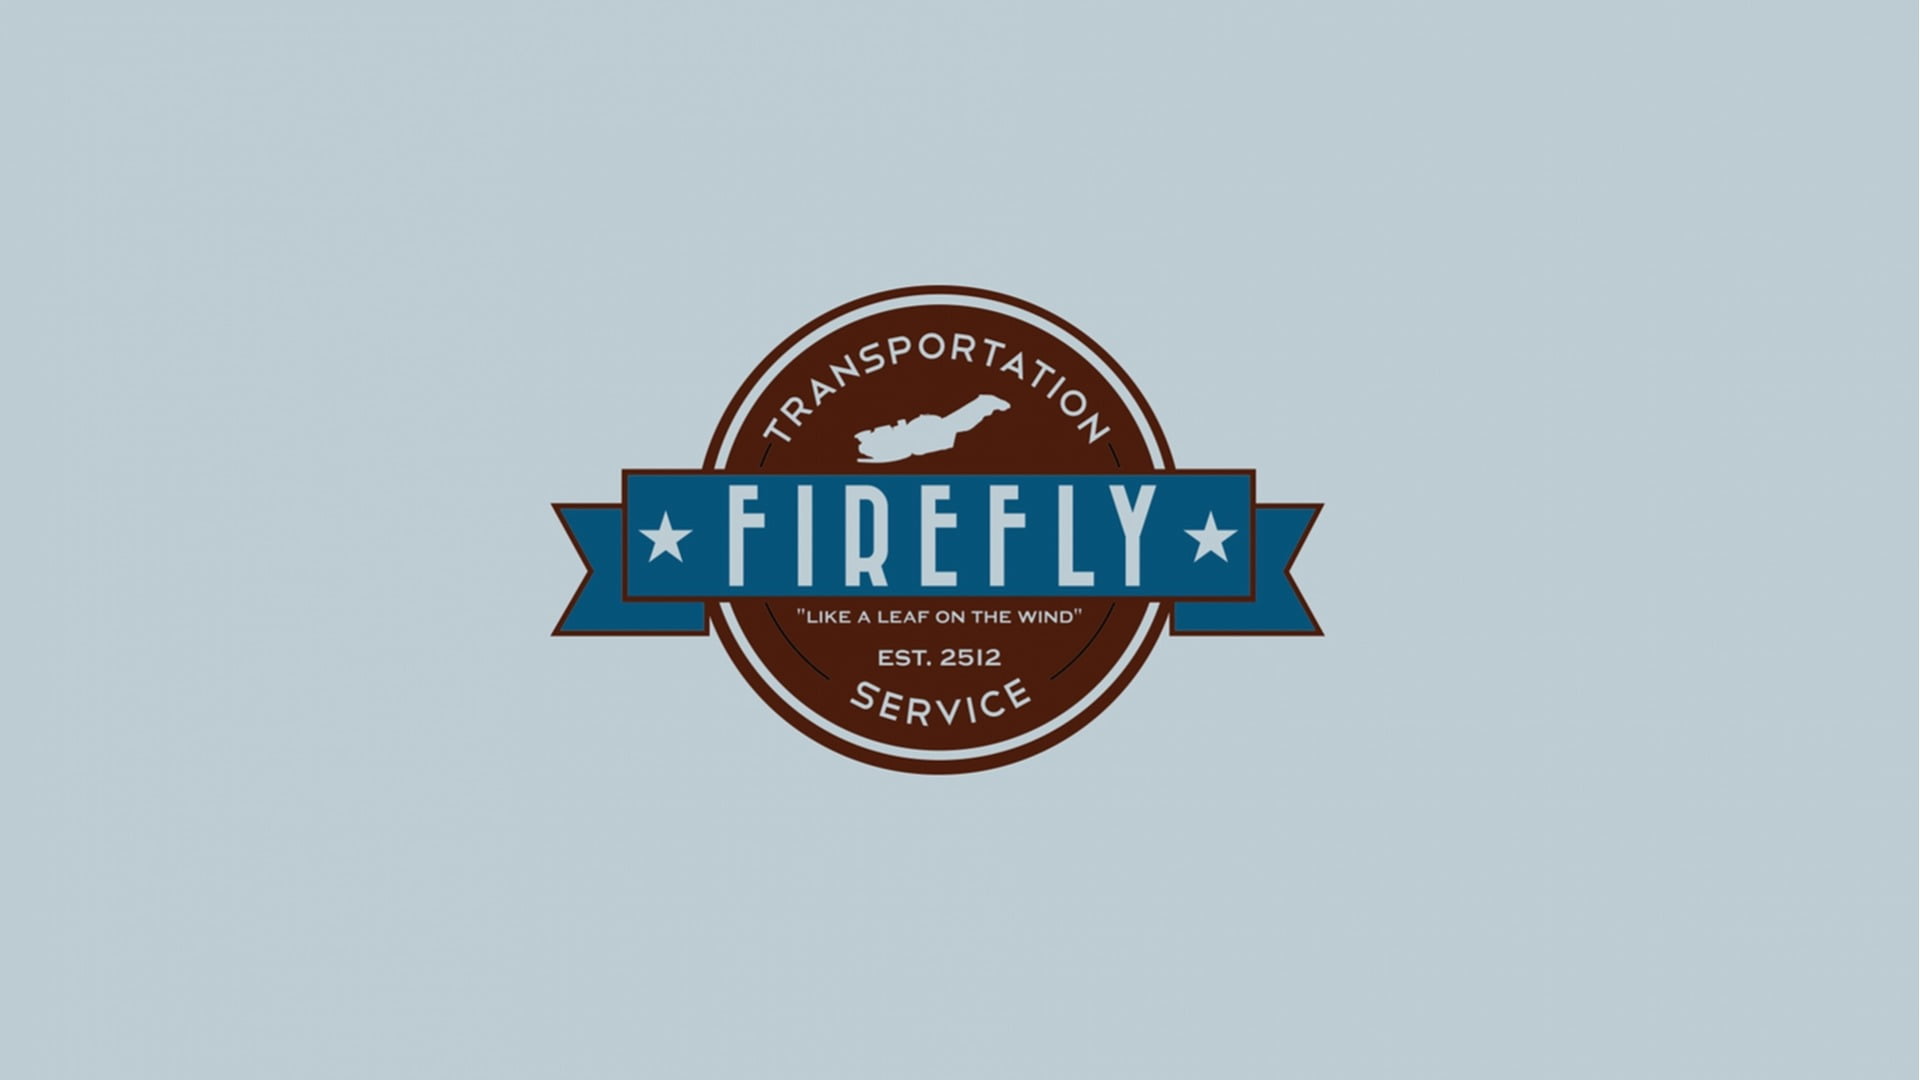 red and blue firefly transportation service advertisement, simple